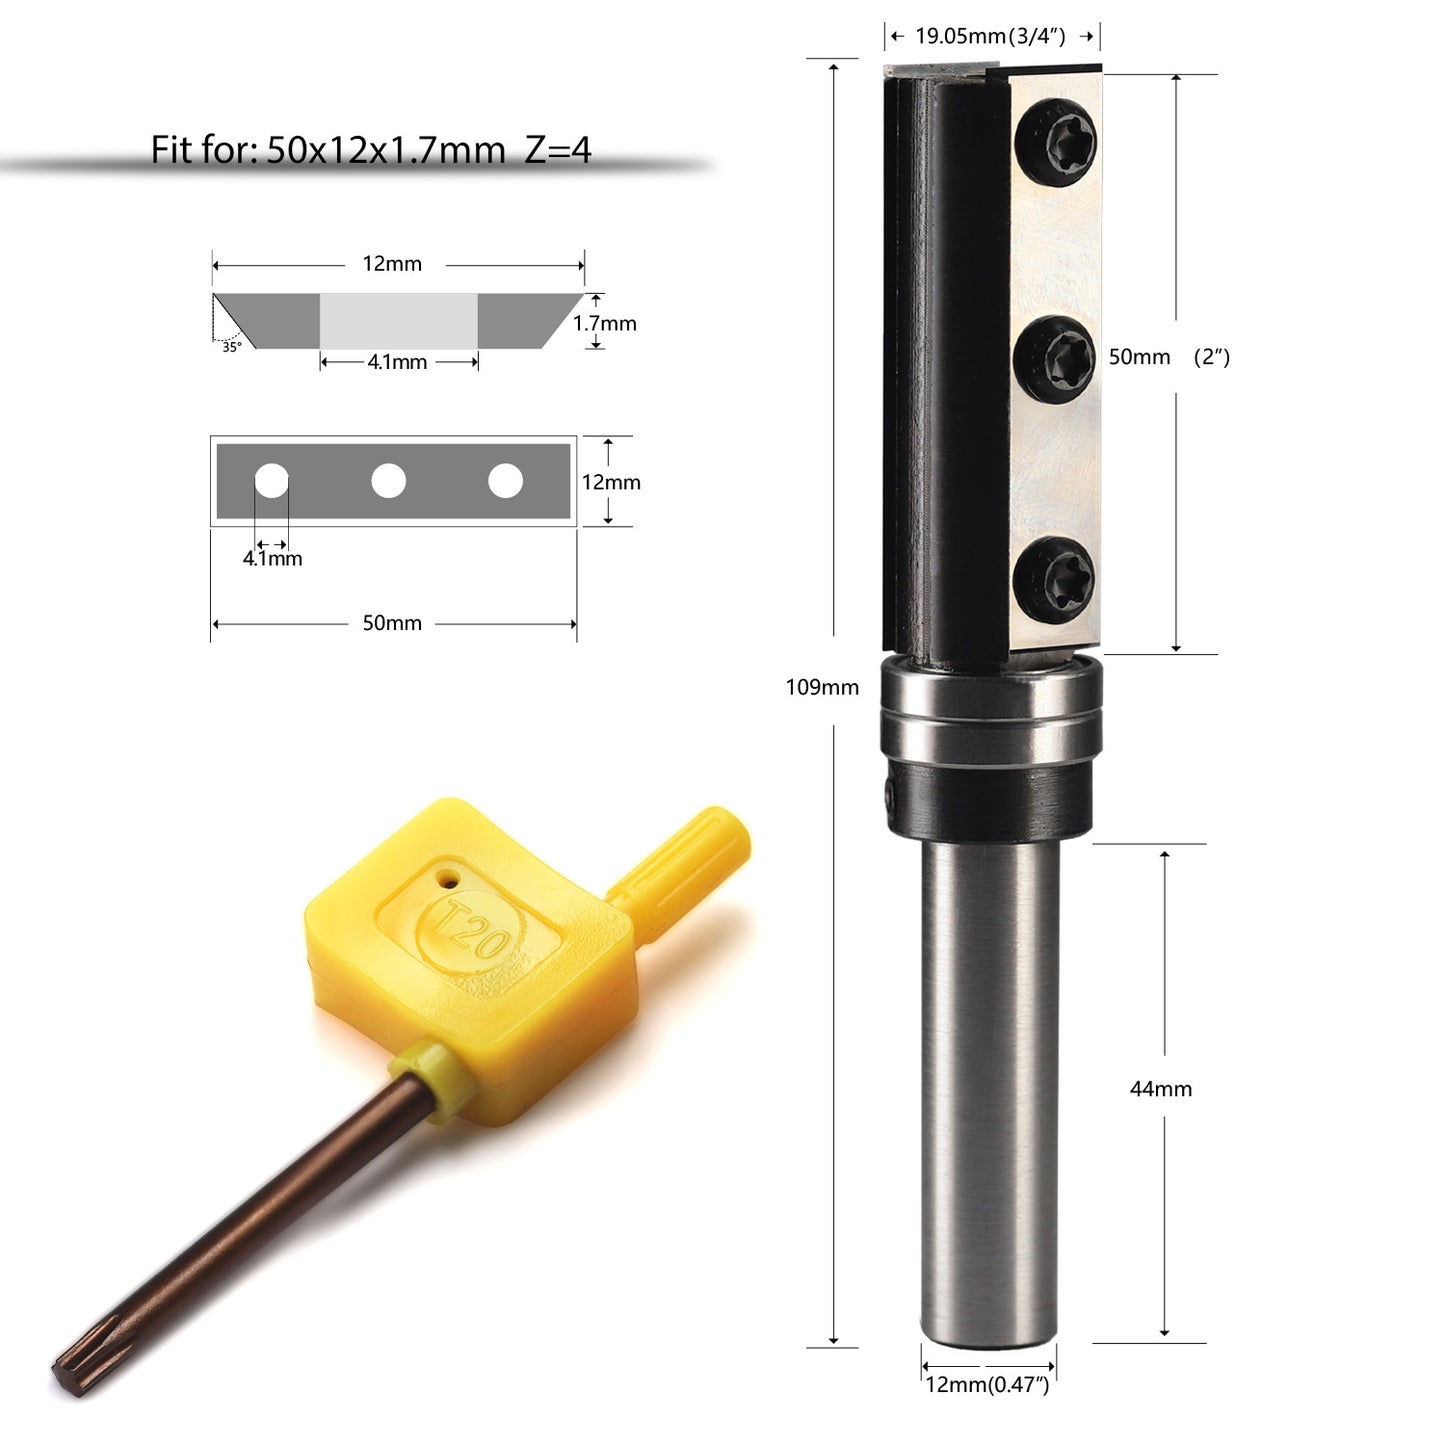 yeptooling top bearing flush trim router bit with 2 pieces carbide inserts, 12 mm shank diameter, 3/4 inch 19.05 mm cutting diameter, 2 inch 50 mm cutting length, 4-3/10 inch 109 mm overall length